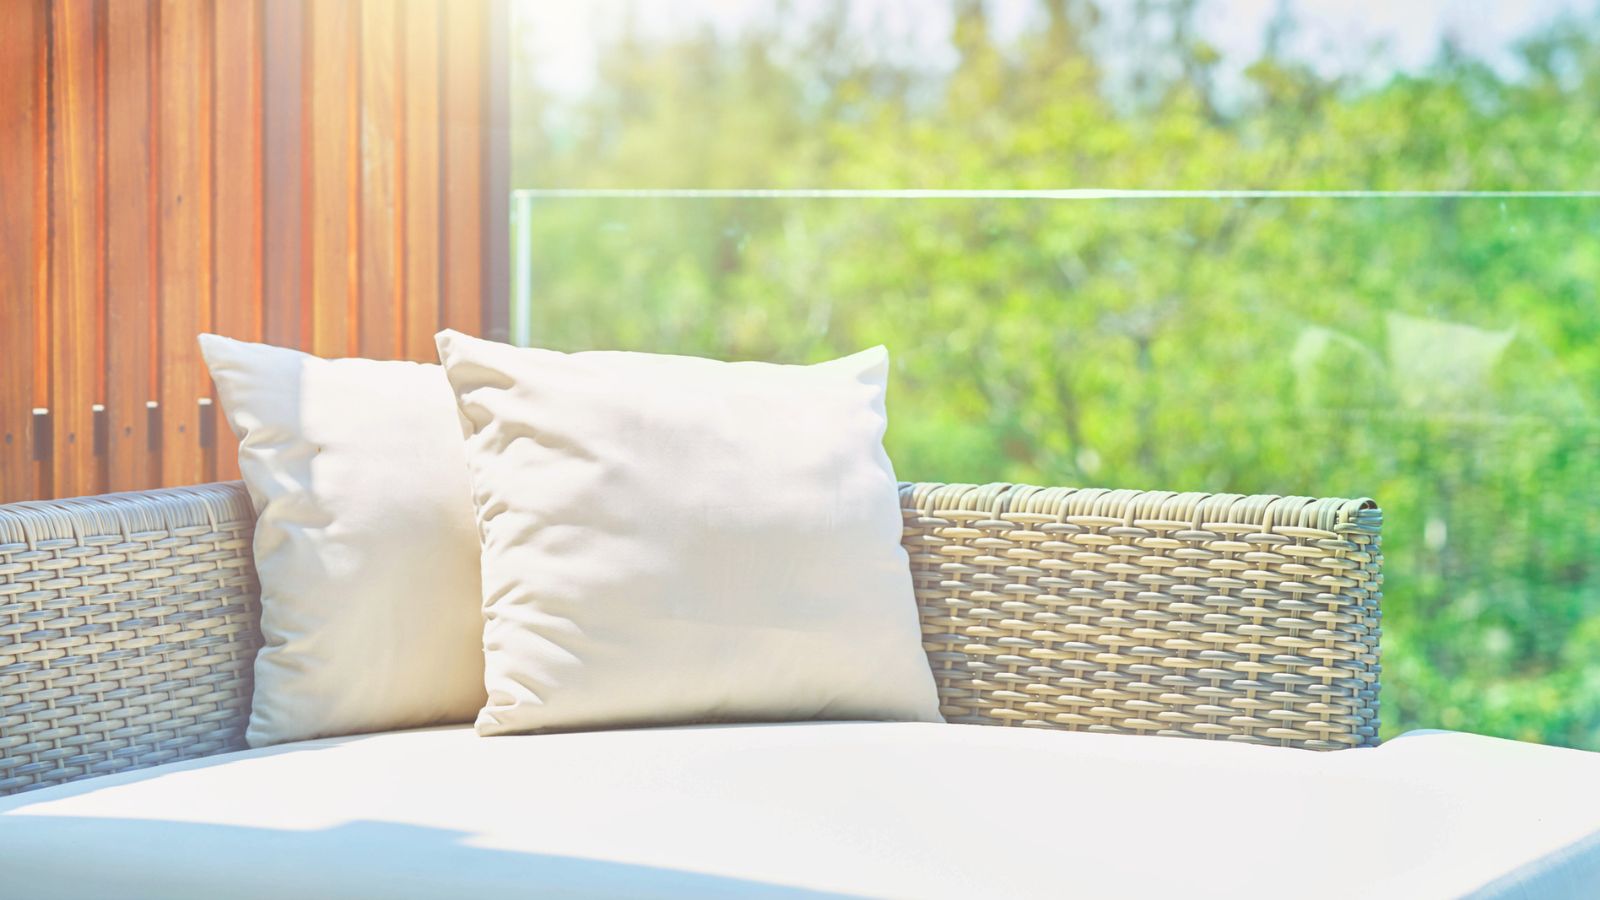 How To Get Mildew Off Outdoor Pillows